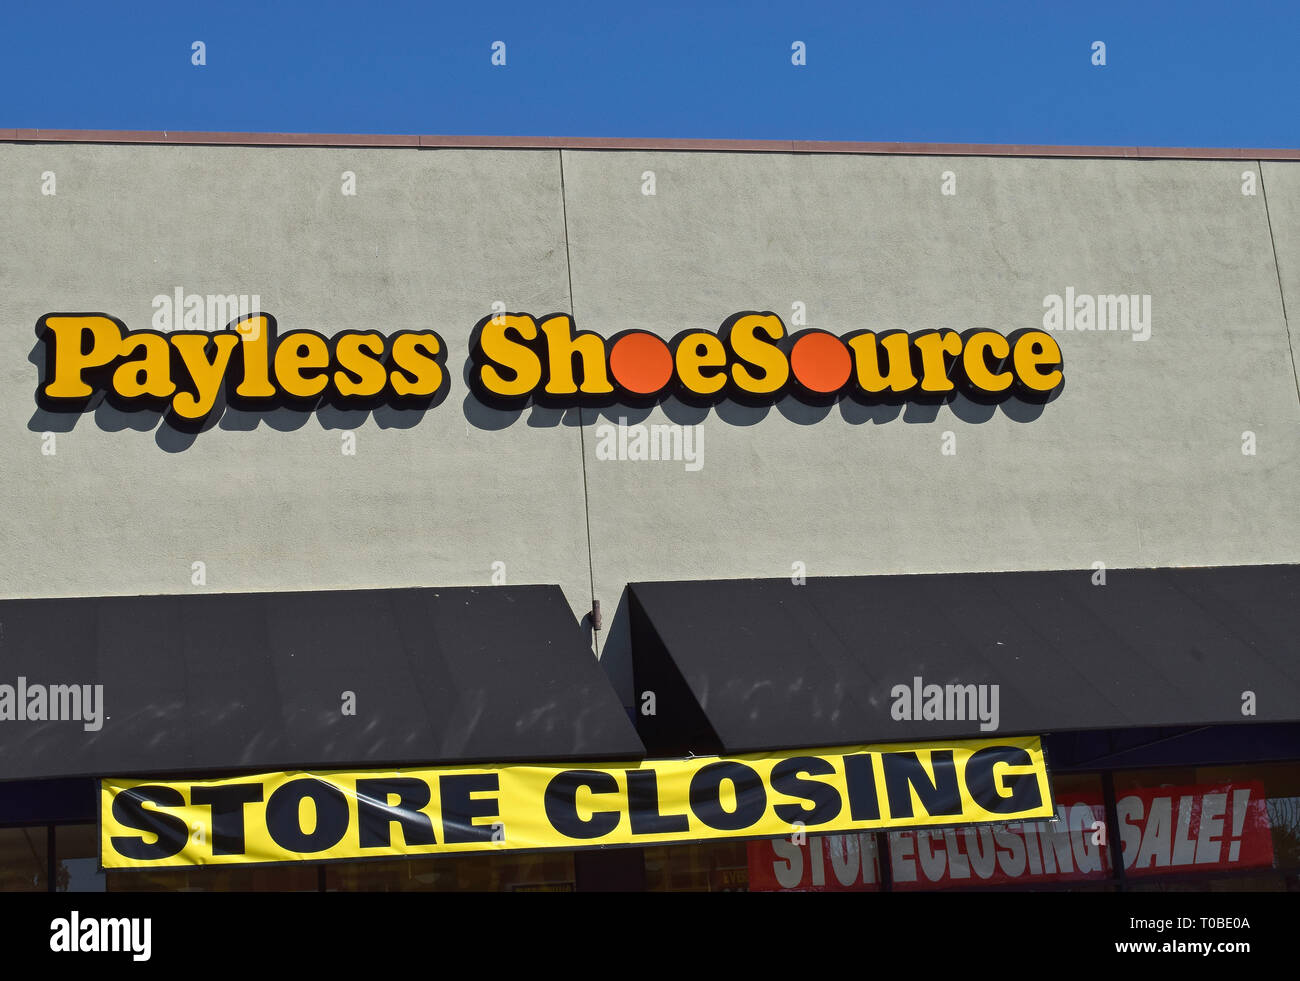 Payless ShoeSource store closing sign in California Stock Photo